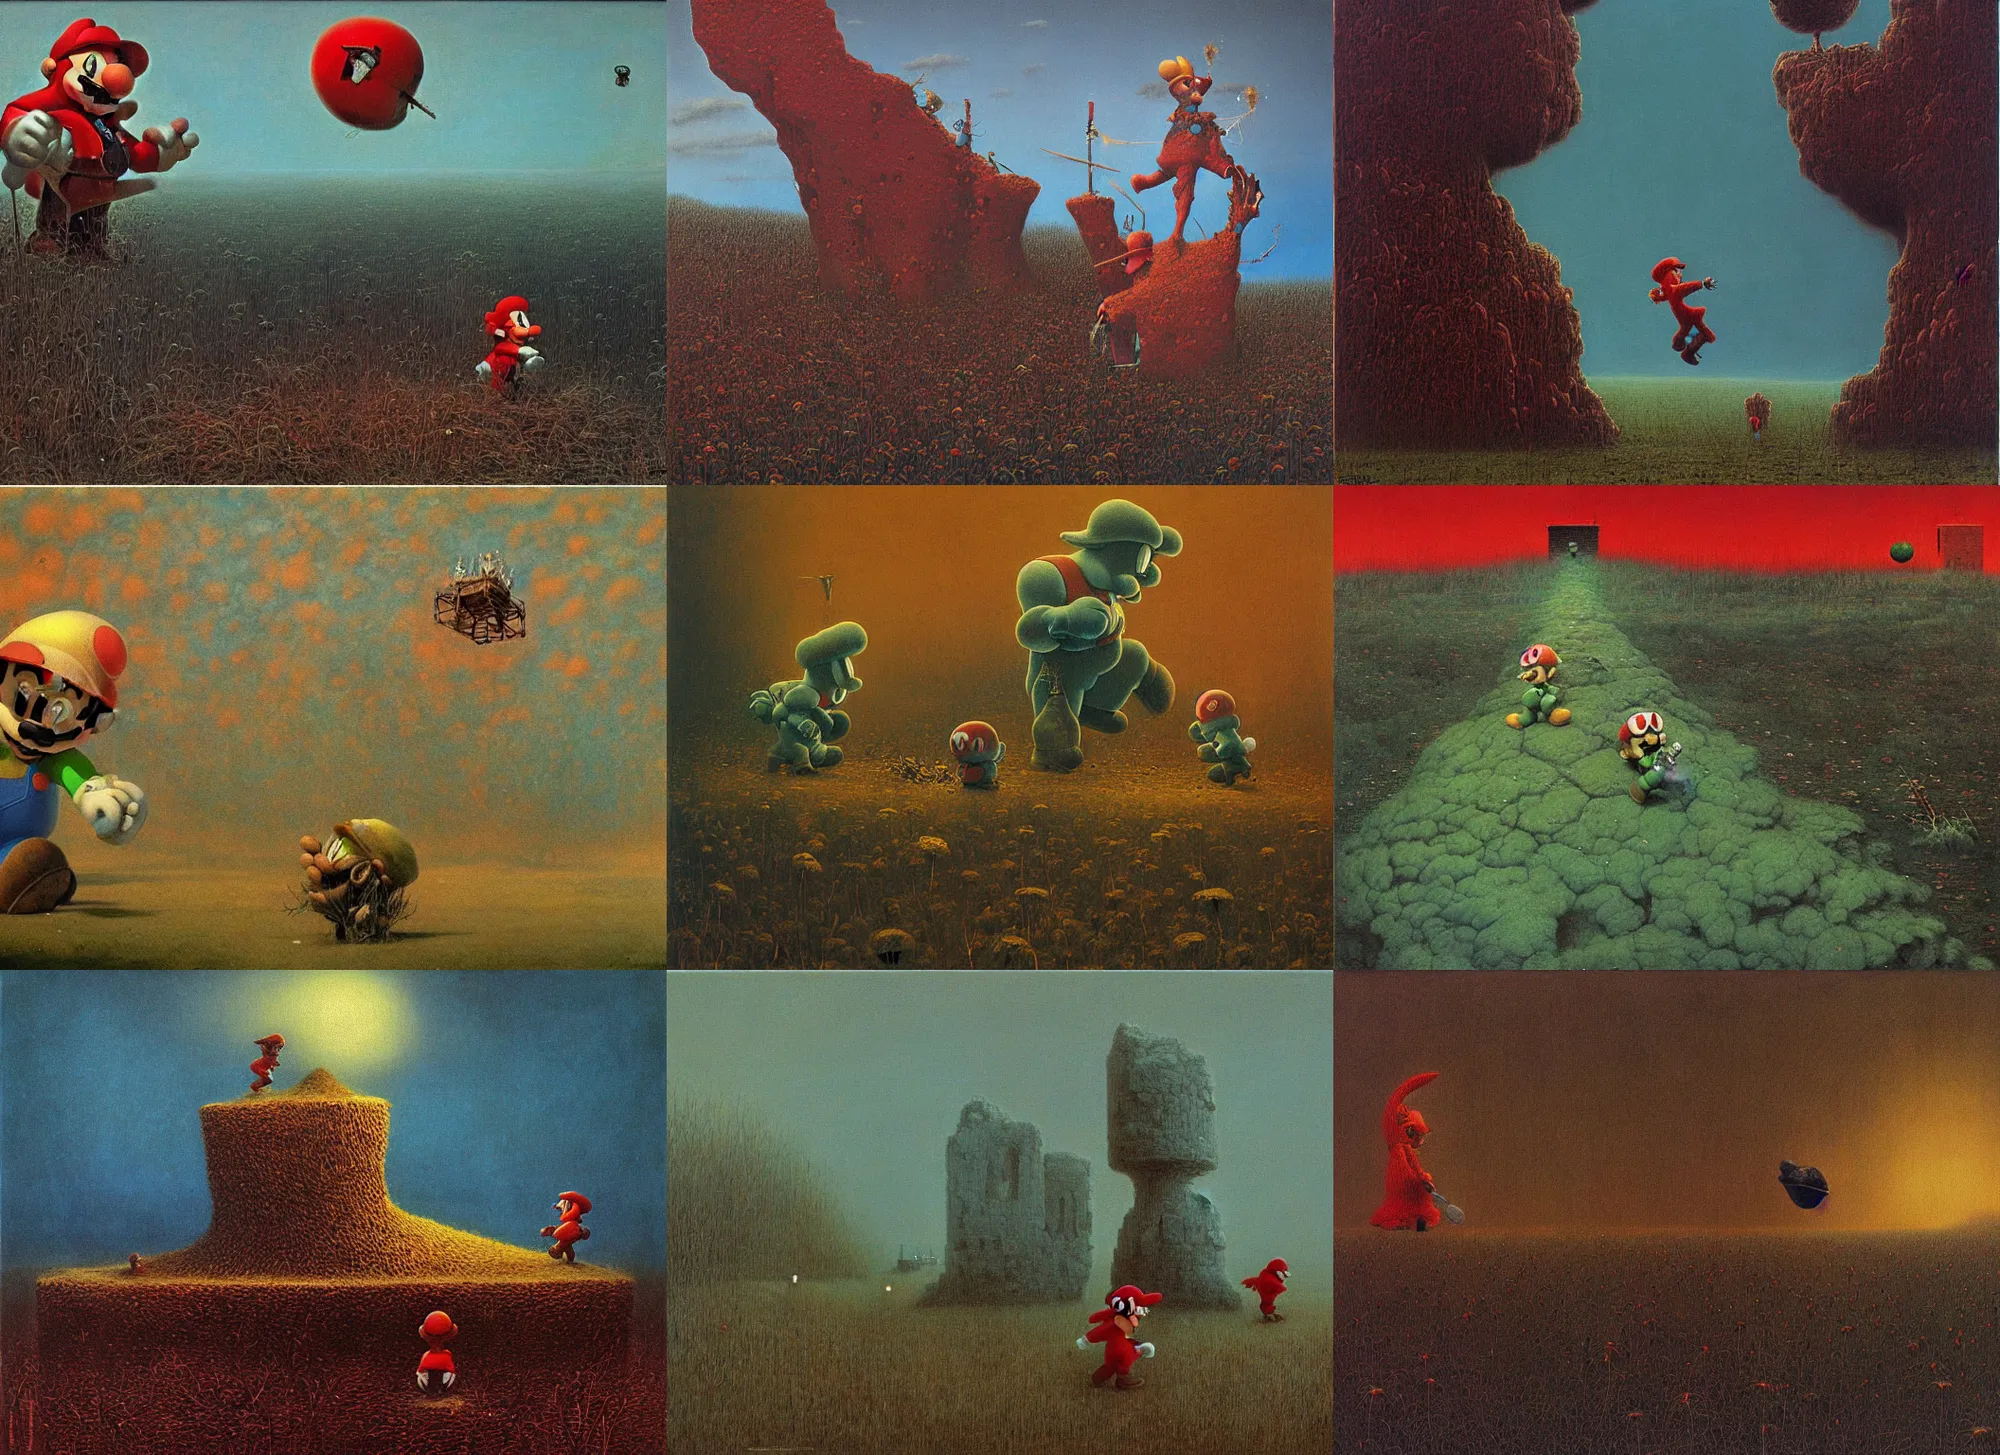 Prompt: zdislaw beksinski painting of the mario brothers